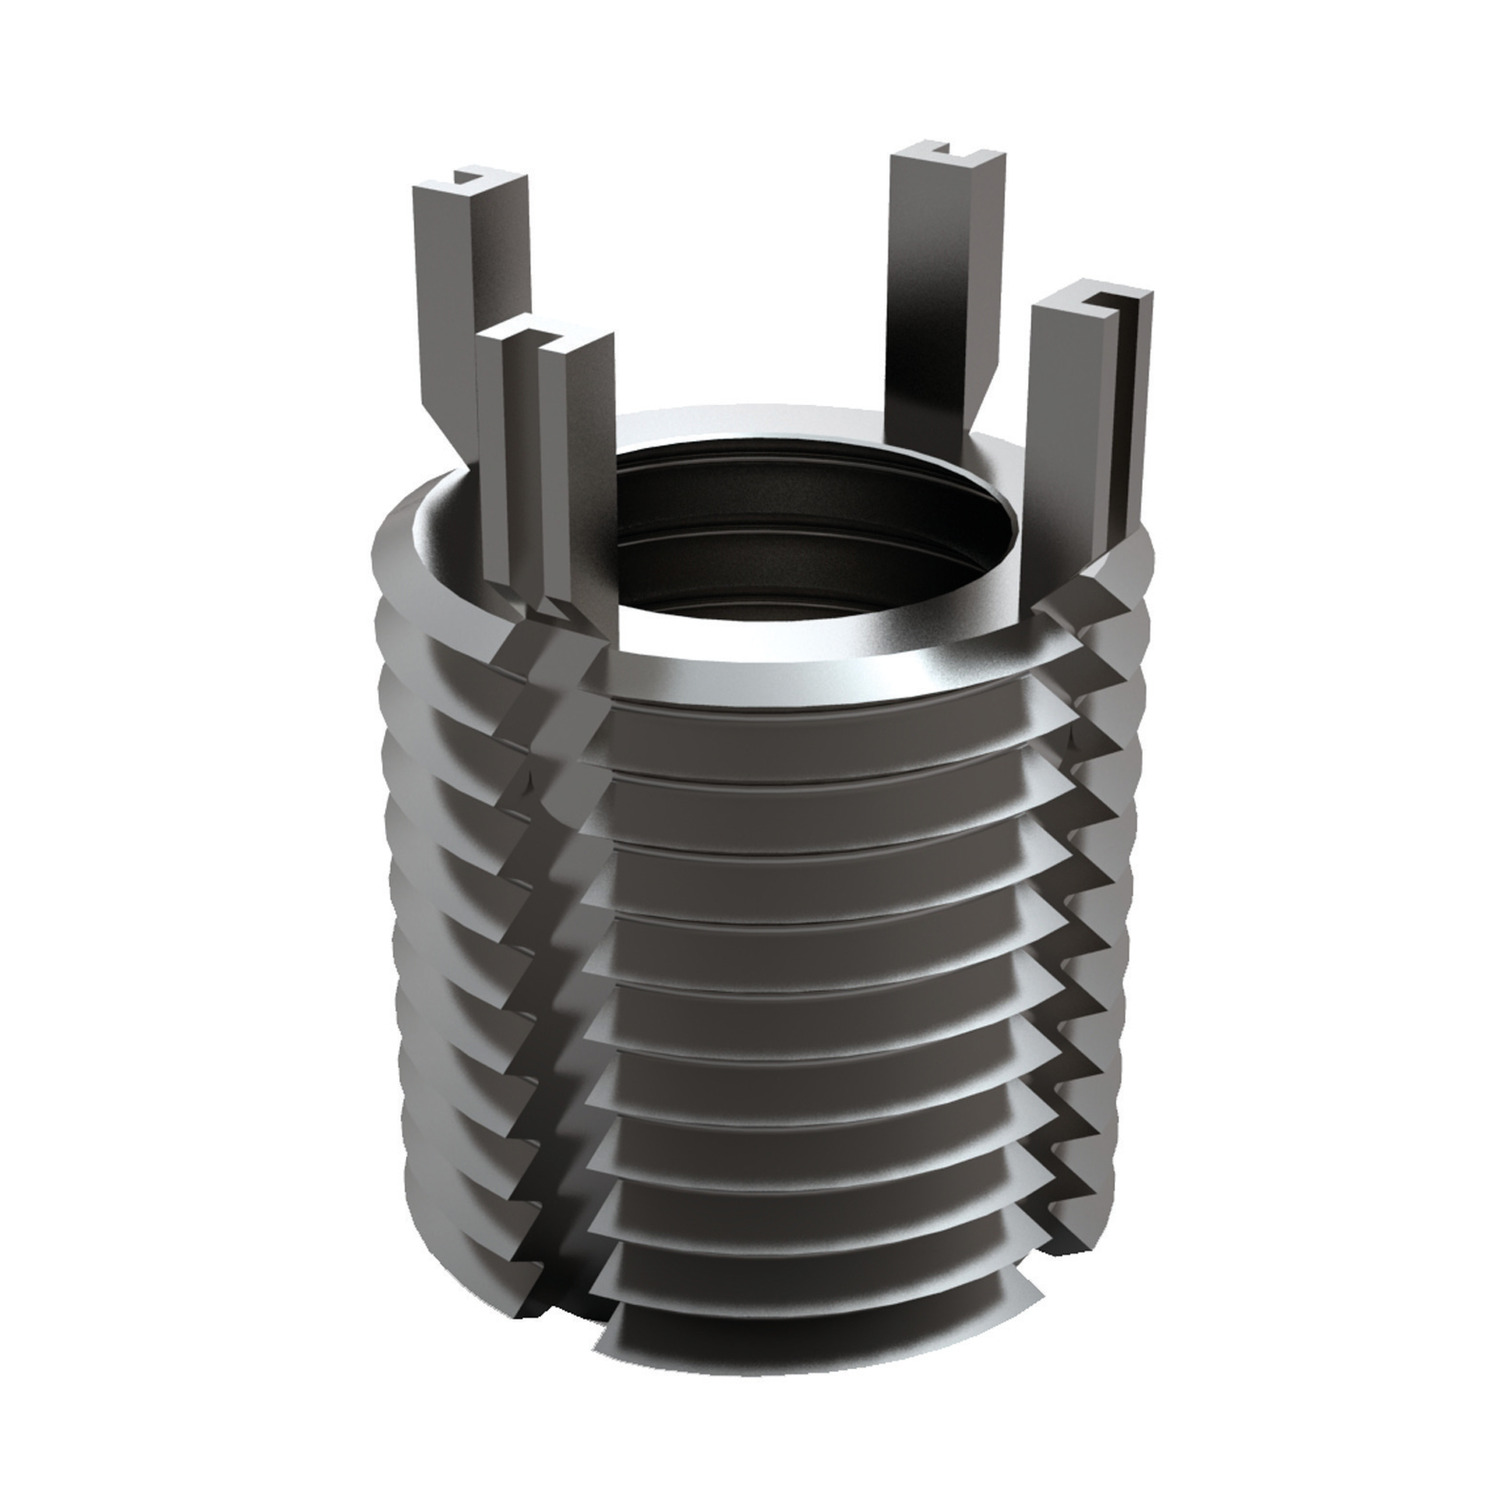 Threaded Insert - Inch These extra heavy duty thread inserts feature increased wall thickness and greater external thread area for maximum durability. Imperial threads, carbon steel.